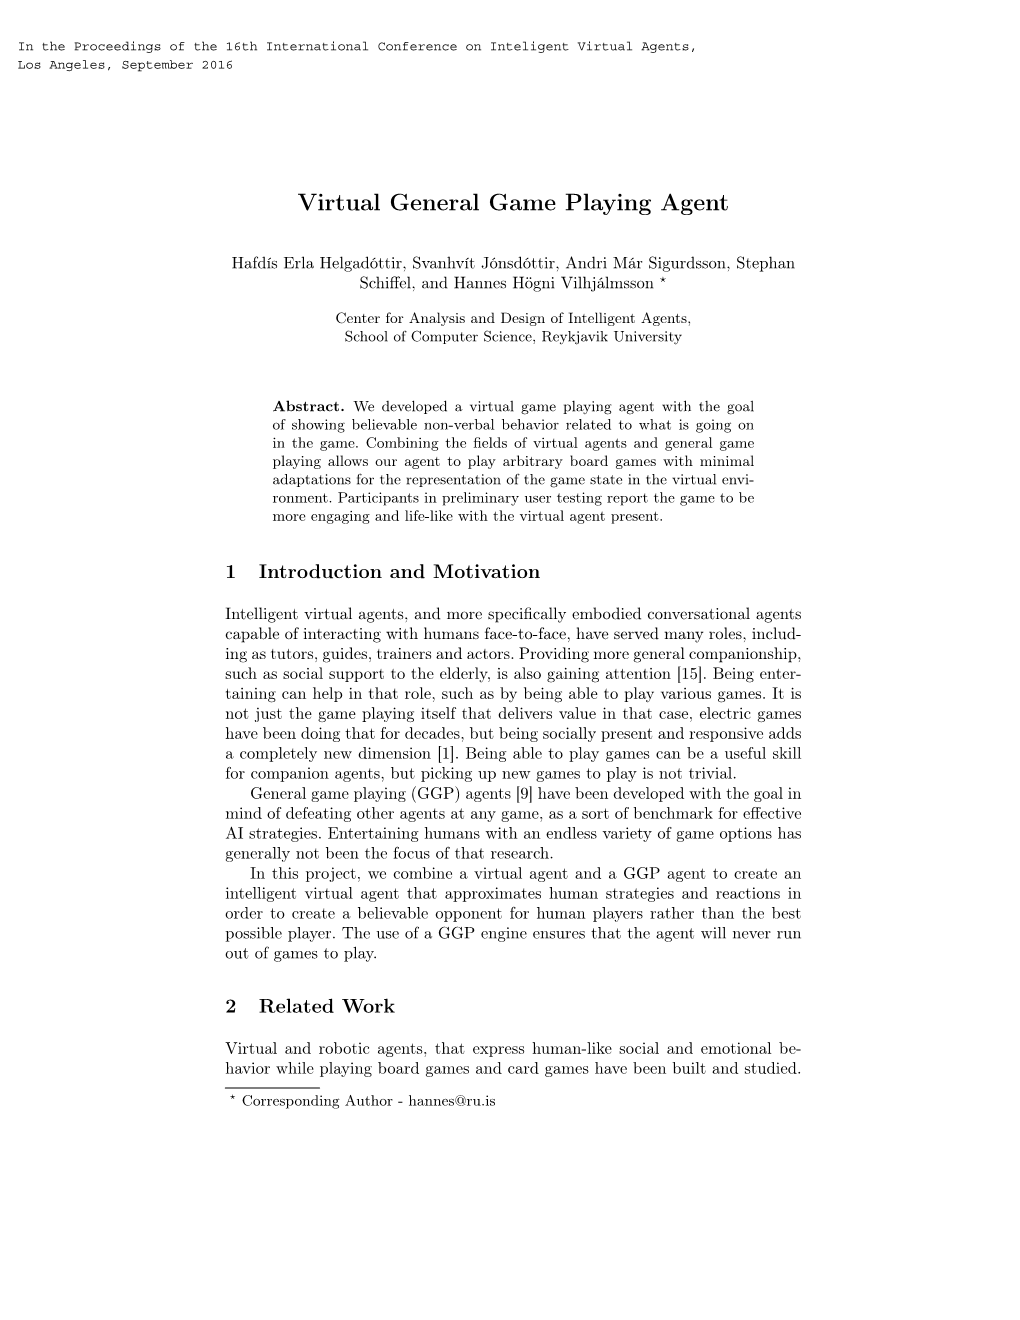 Virtual General Game Playing Agent